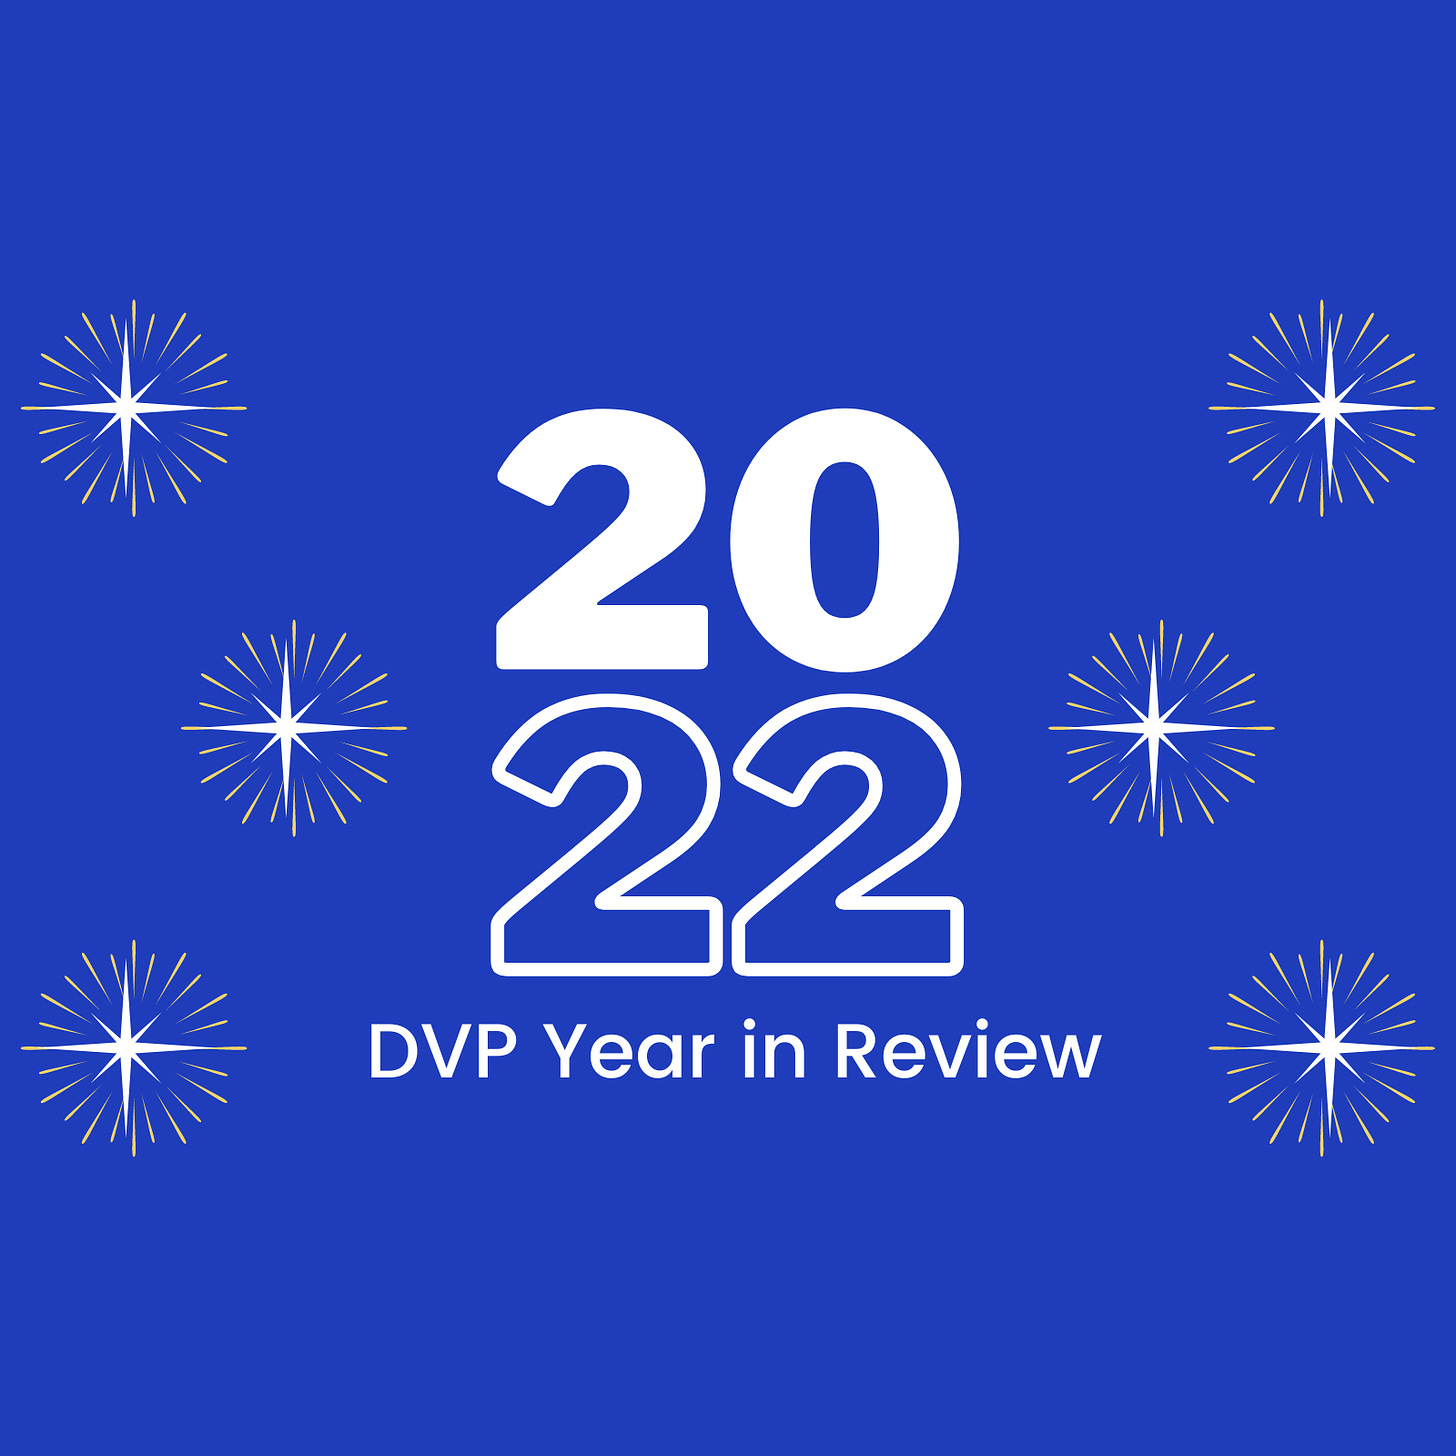 Graphic in blue with white starbursts in the background. In the center in large text is 2022 with 20 stacked on top of 22. Below in white text: DVP Year in Review